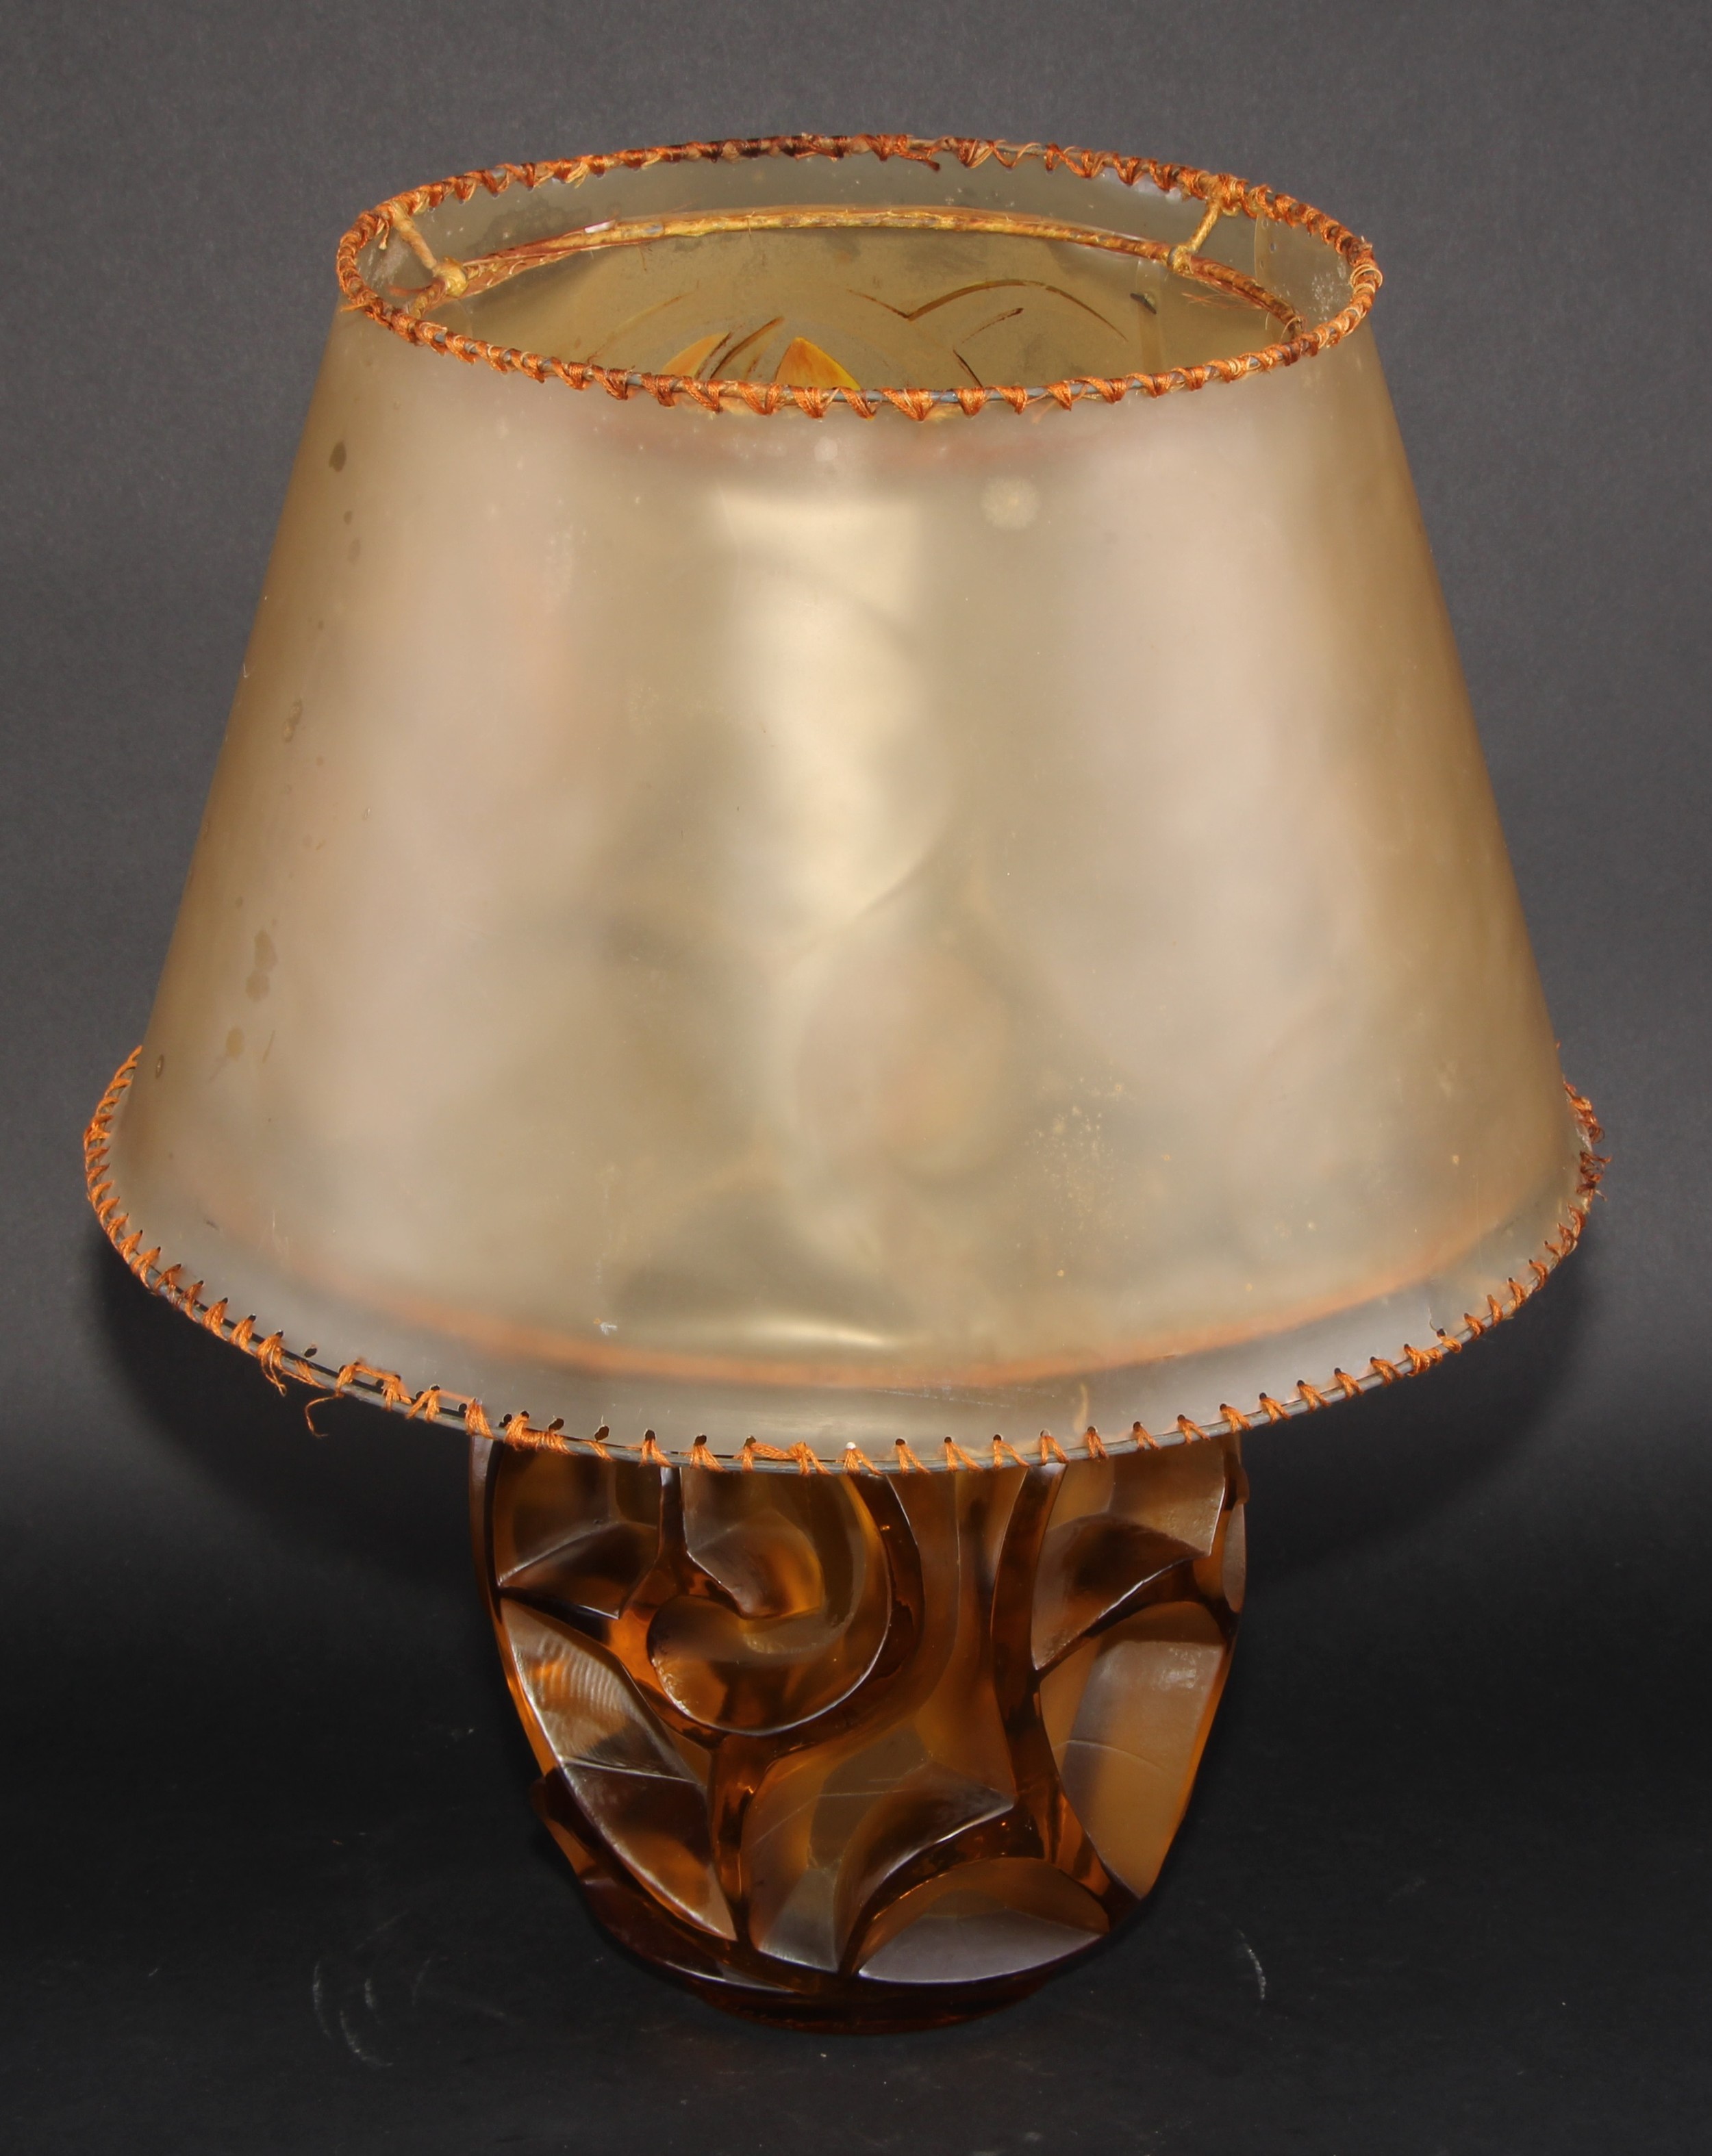 A René Jules Lalique (6 April 1860 – 1 May 1945) Tourbillons pattern ovoid amber glass vase, moulded - Image 5 of 6